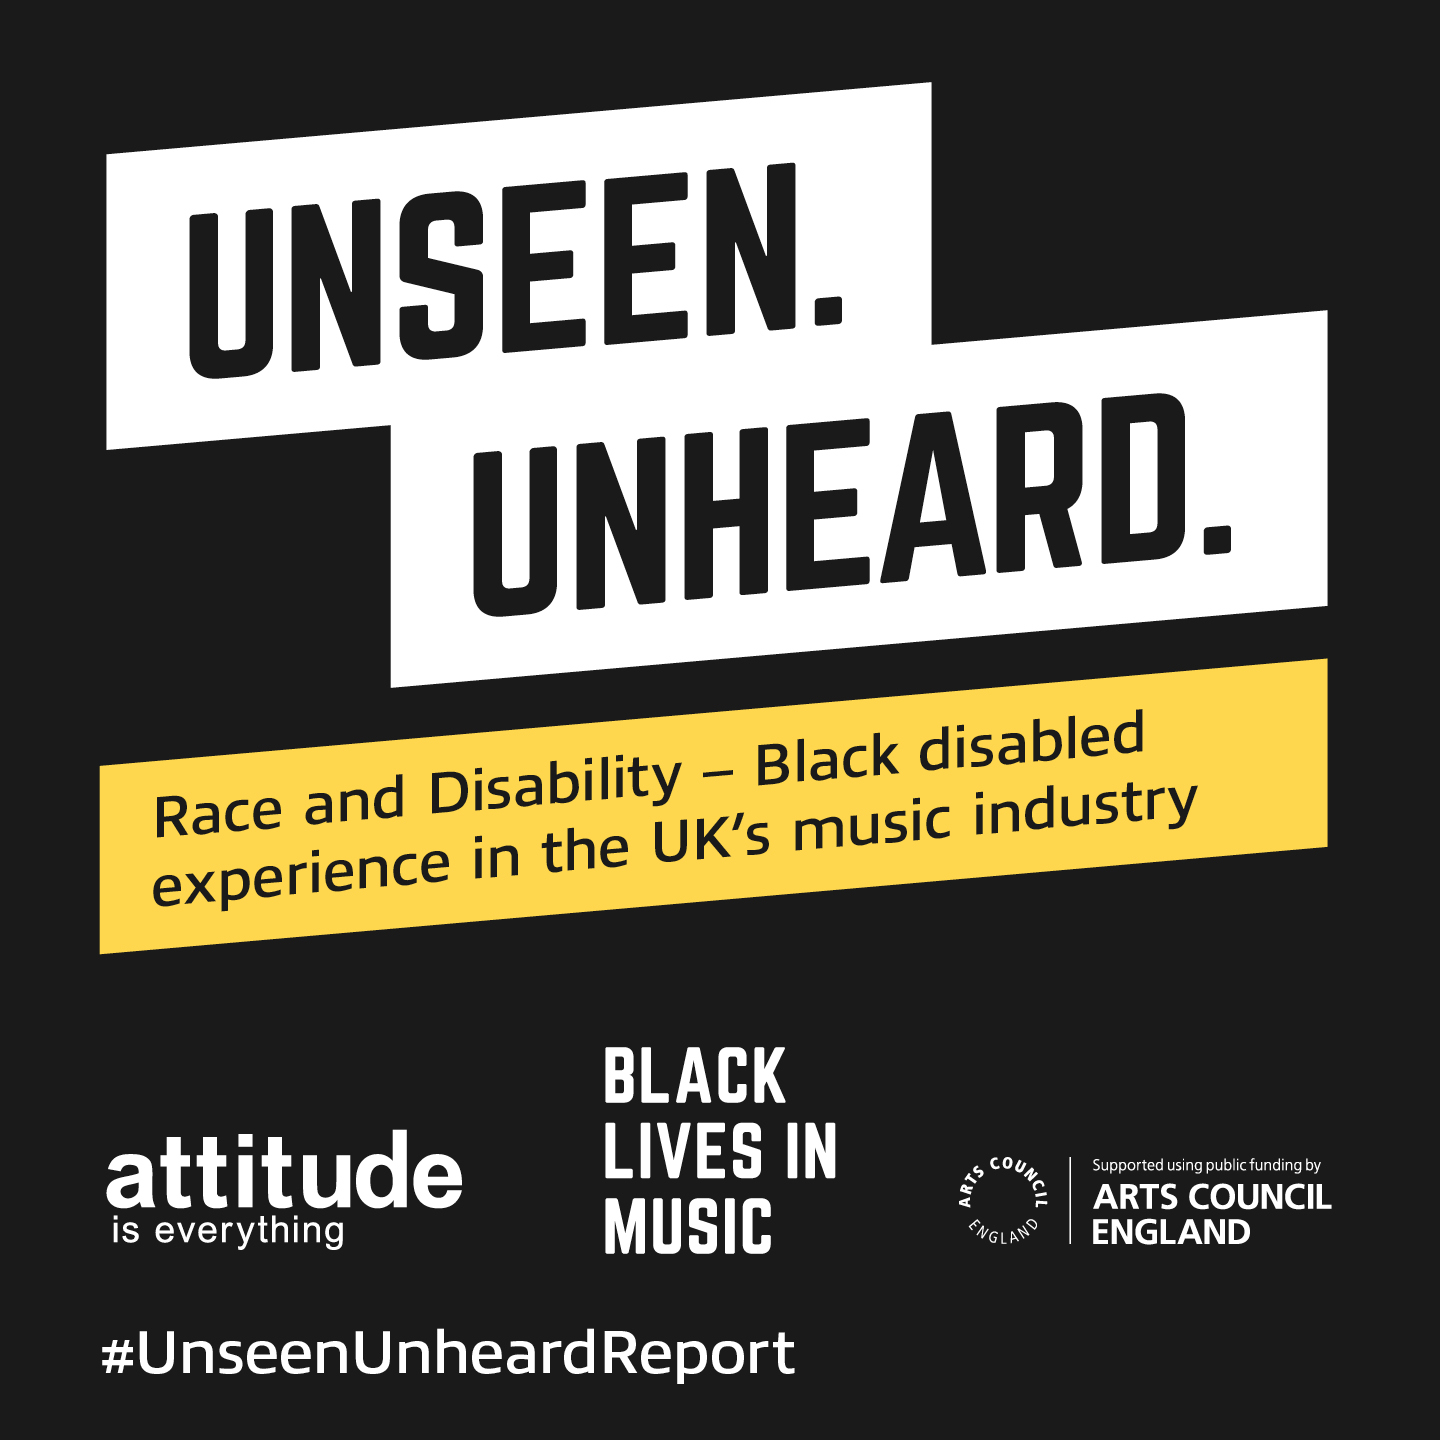 Unseen. Unheard. Race and Disability – Black disabled experience in the UK’s music industry. Attitude is Everything. Black Lives in Music. Supported using public funding by Arts Council England. #UnseenUnheardReport